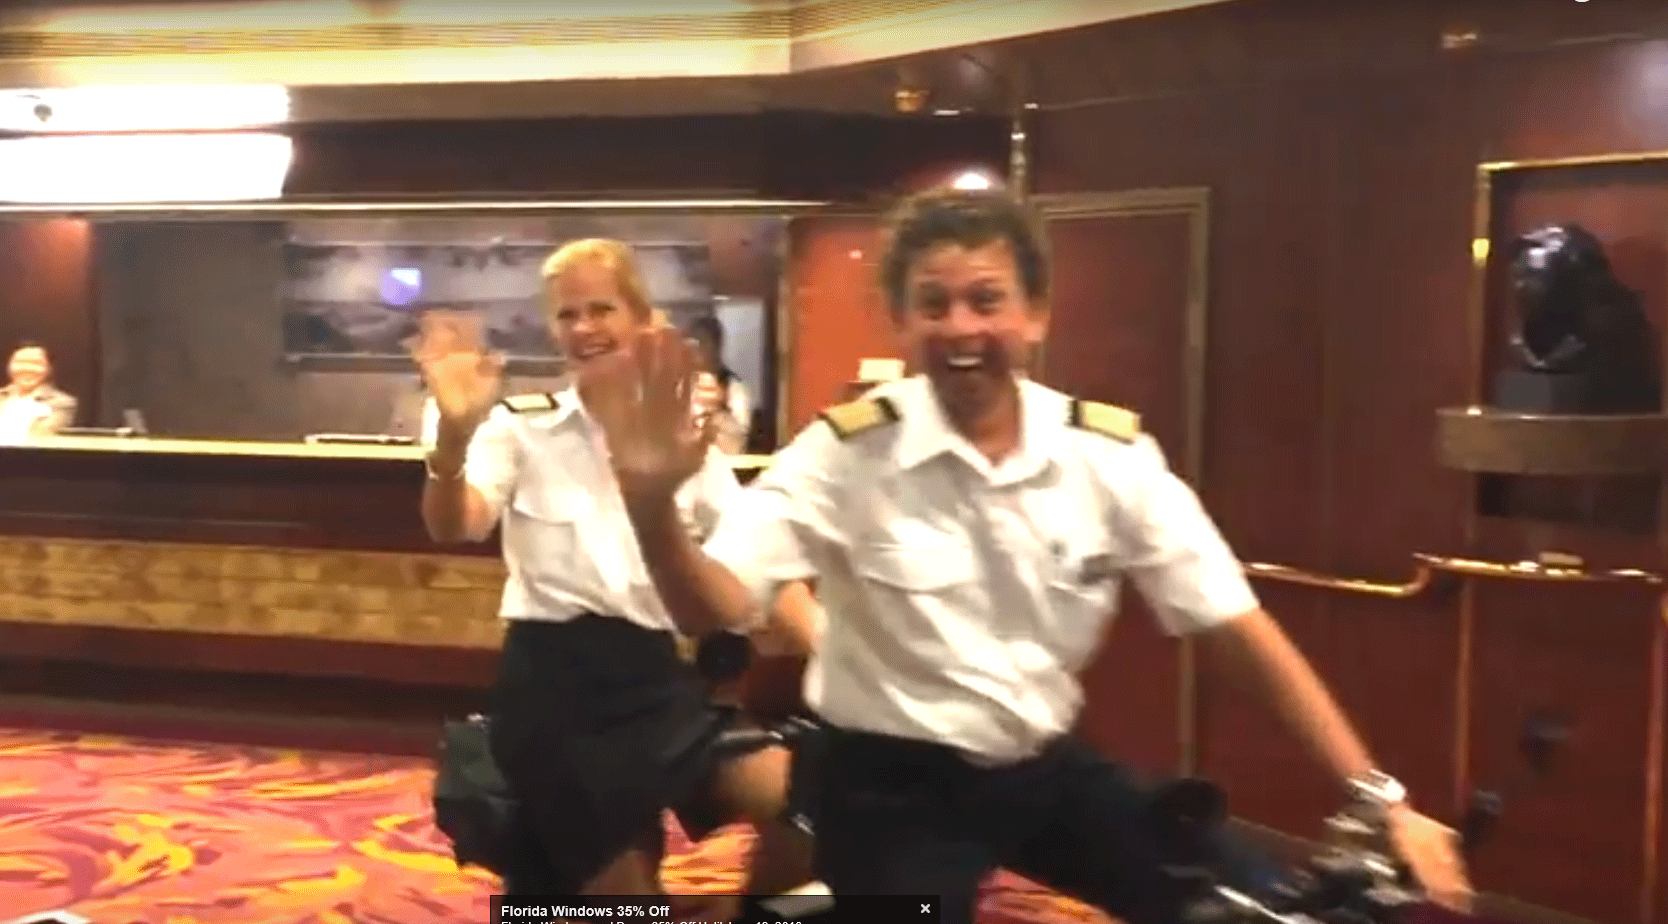 Amazing end of cruise video!